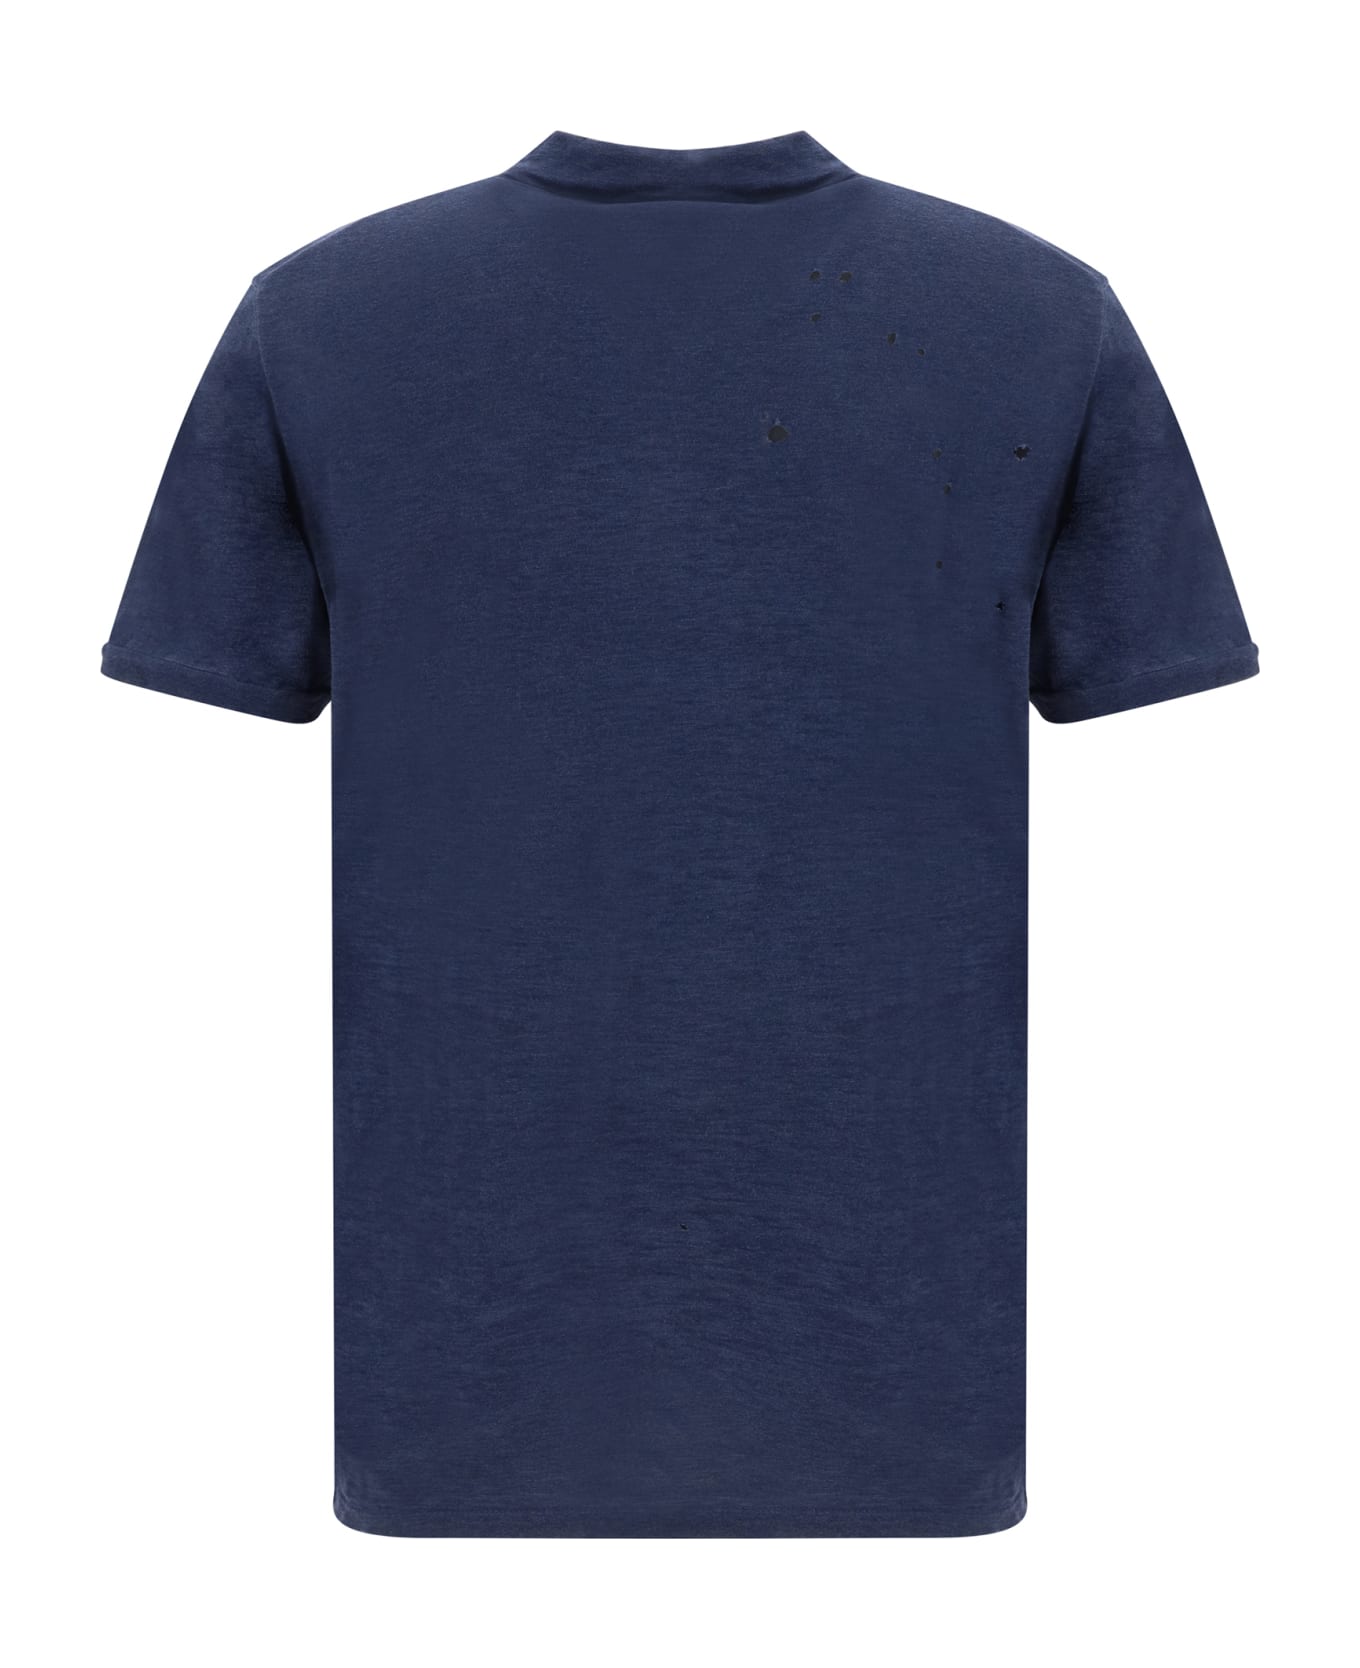 Dsquared2 Polo Shirt - Navy Blue ポロシャツ